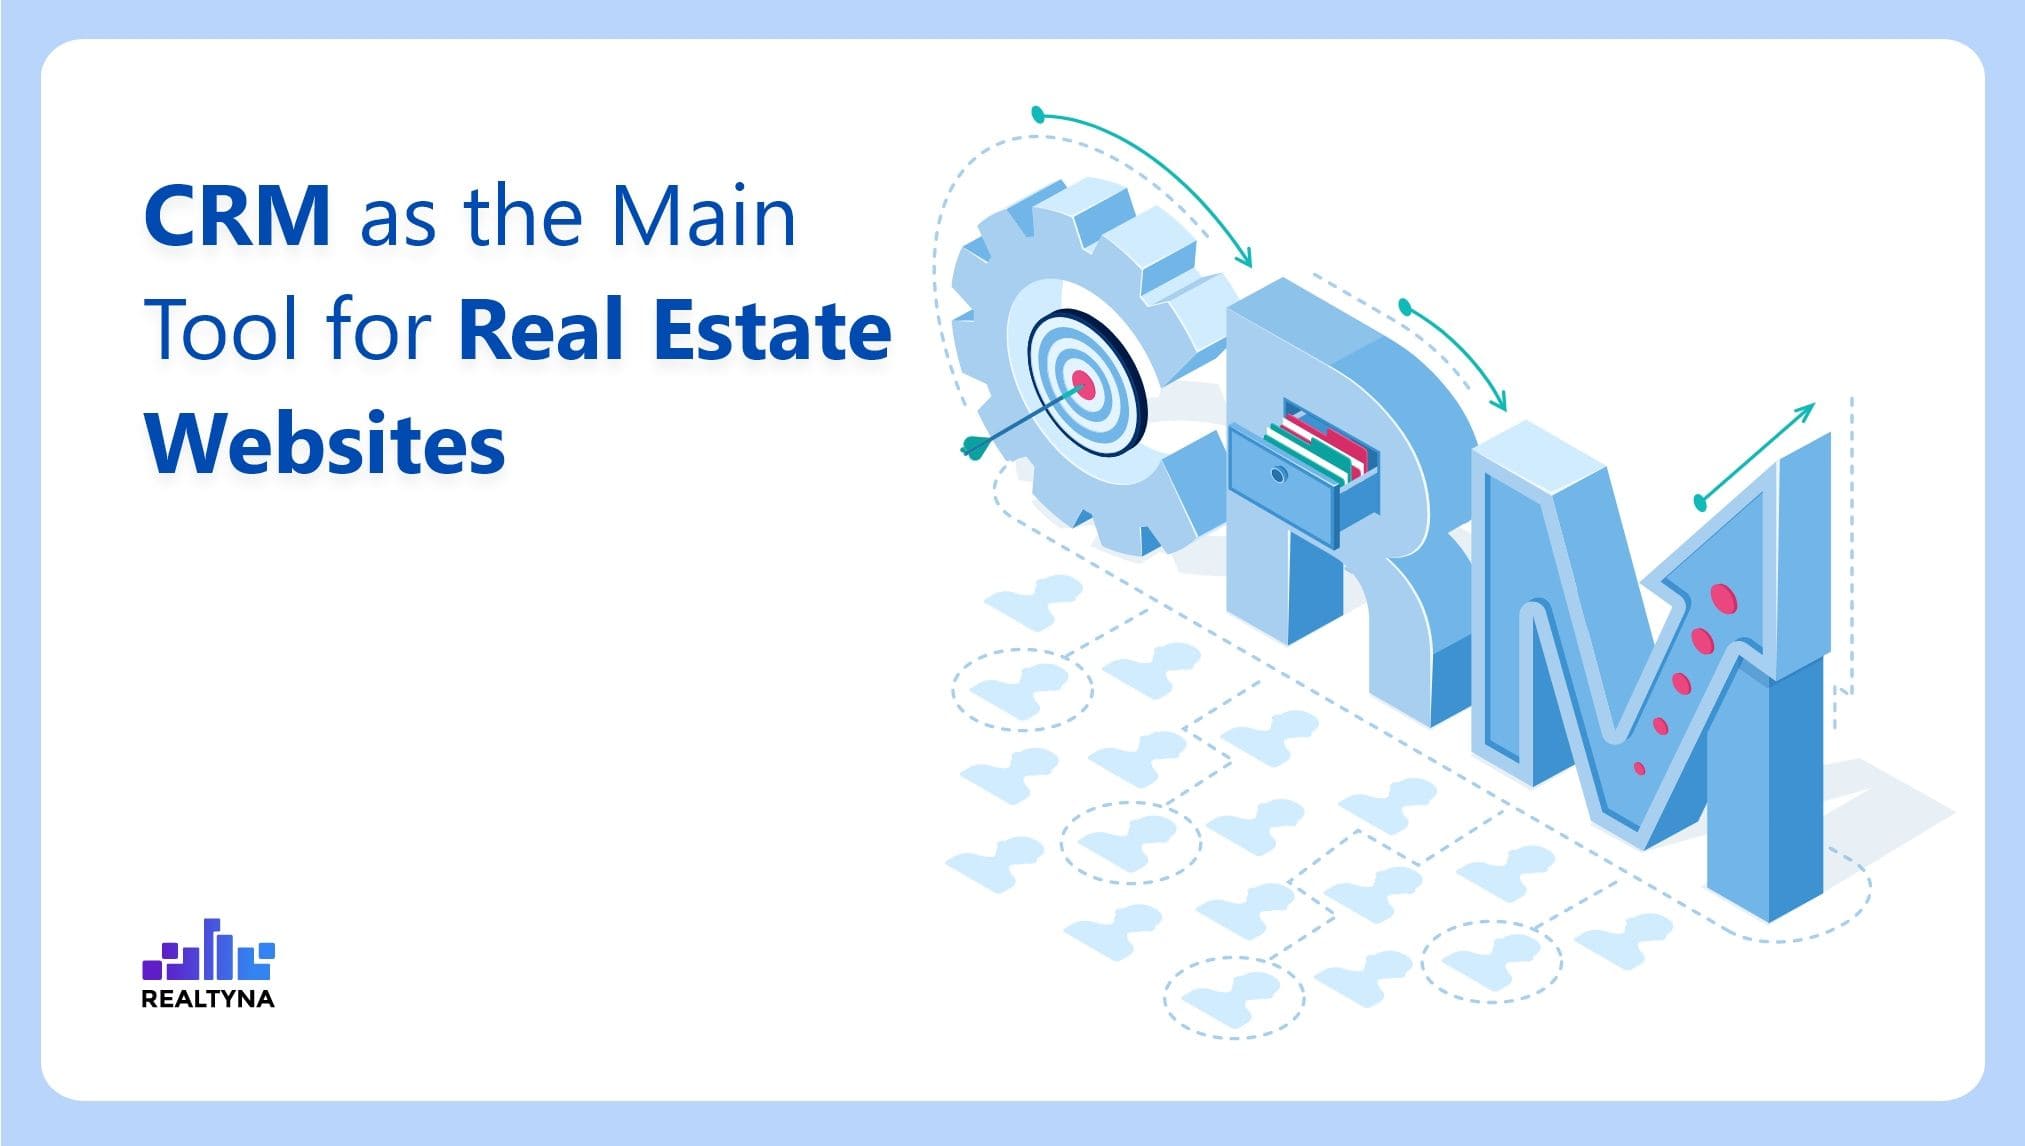 CRM-as-the-Main-Tool-for-Real-Estate-Websites.jpeg